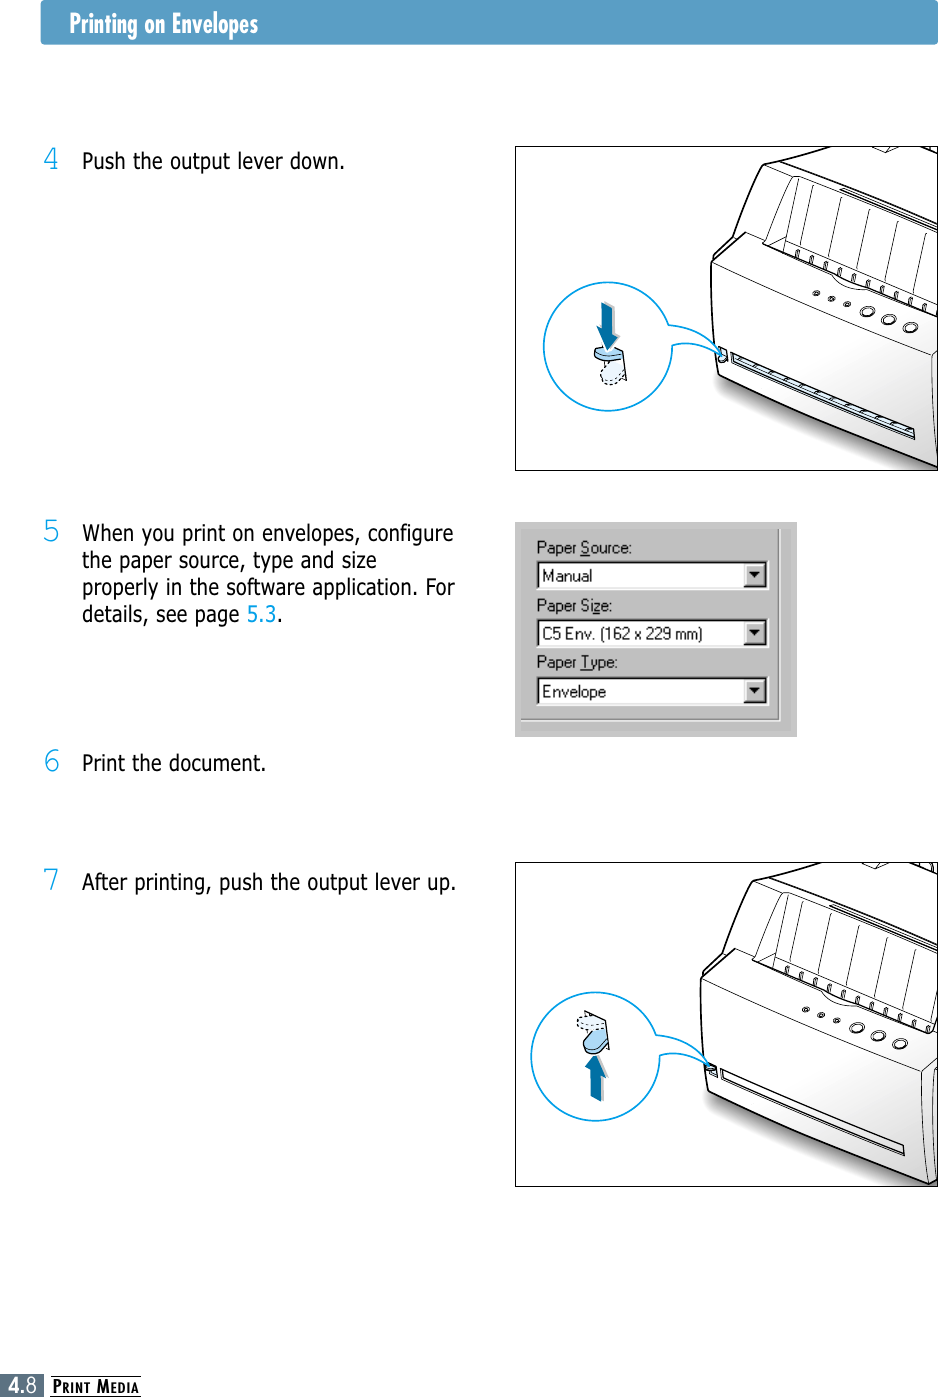 PRINT MEDIA4.84Push the output lever down.5When you print on envelopes, configurethe paper source, type and sizeproperly in the software application. Fordetails, see page 5.3.7After printing, push the output lever up.6Print the document.Printing on Envelopes